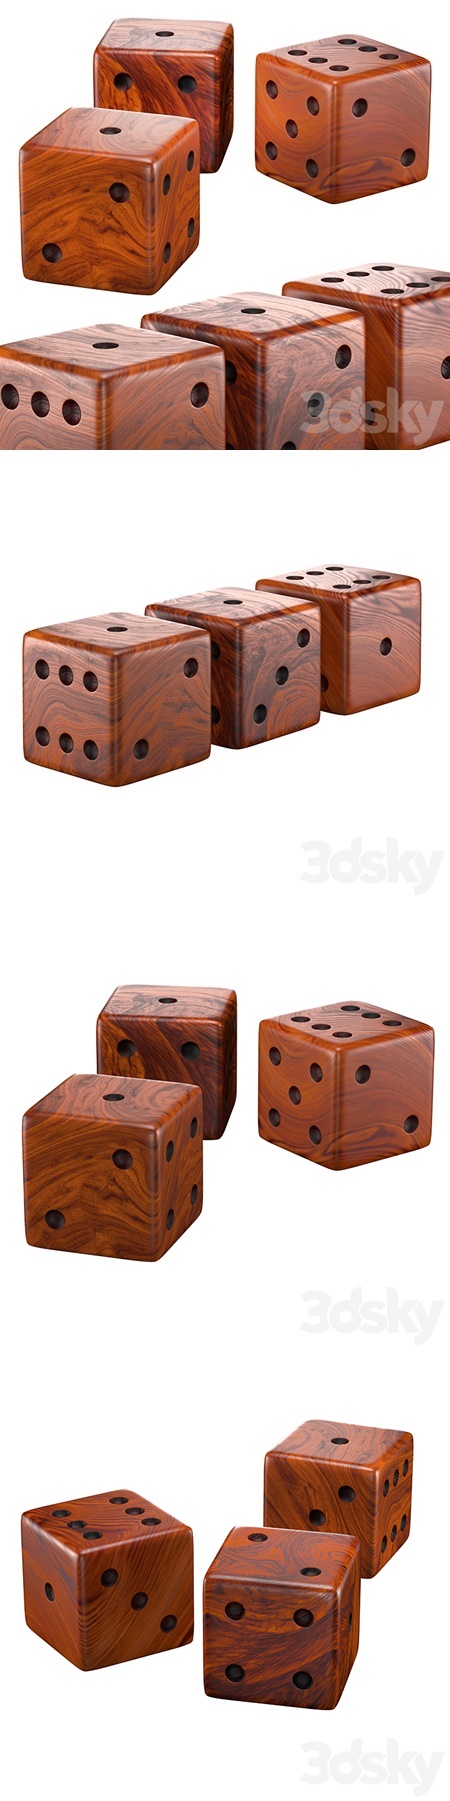 Dice side table